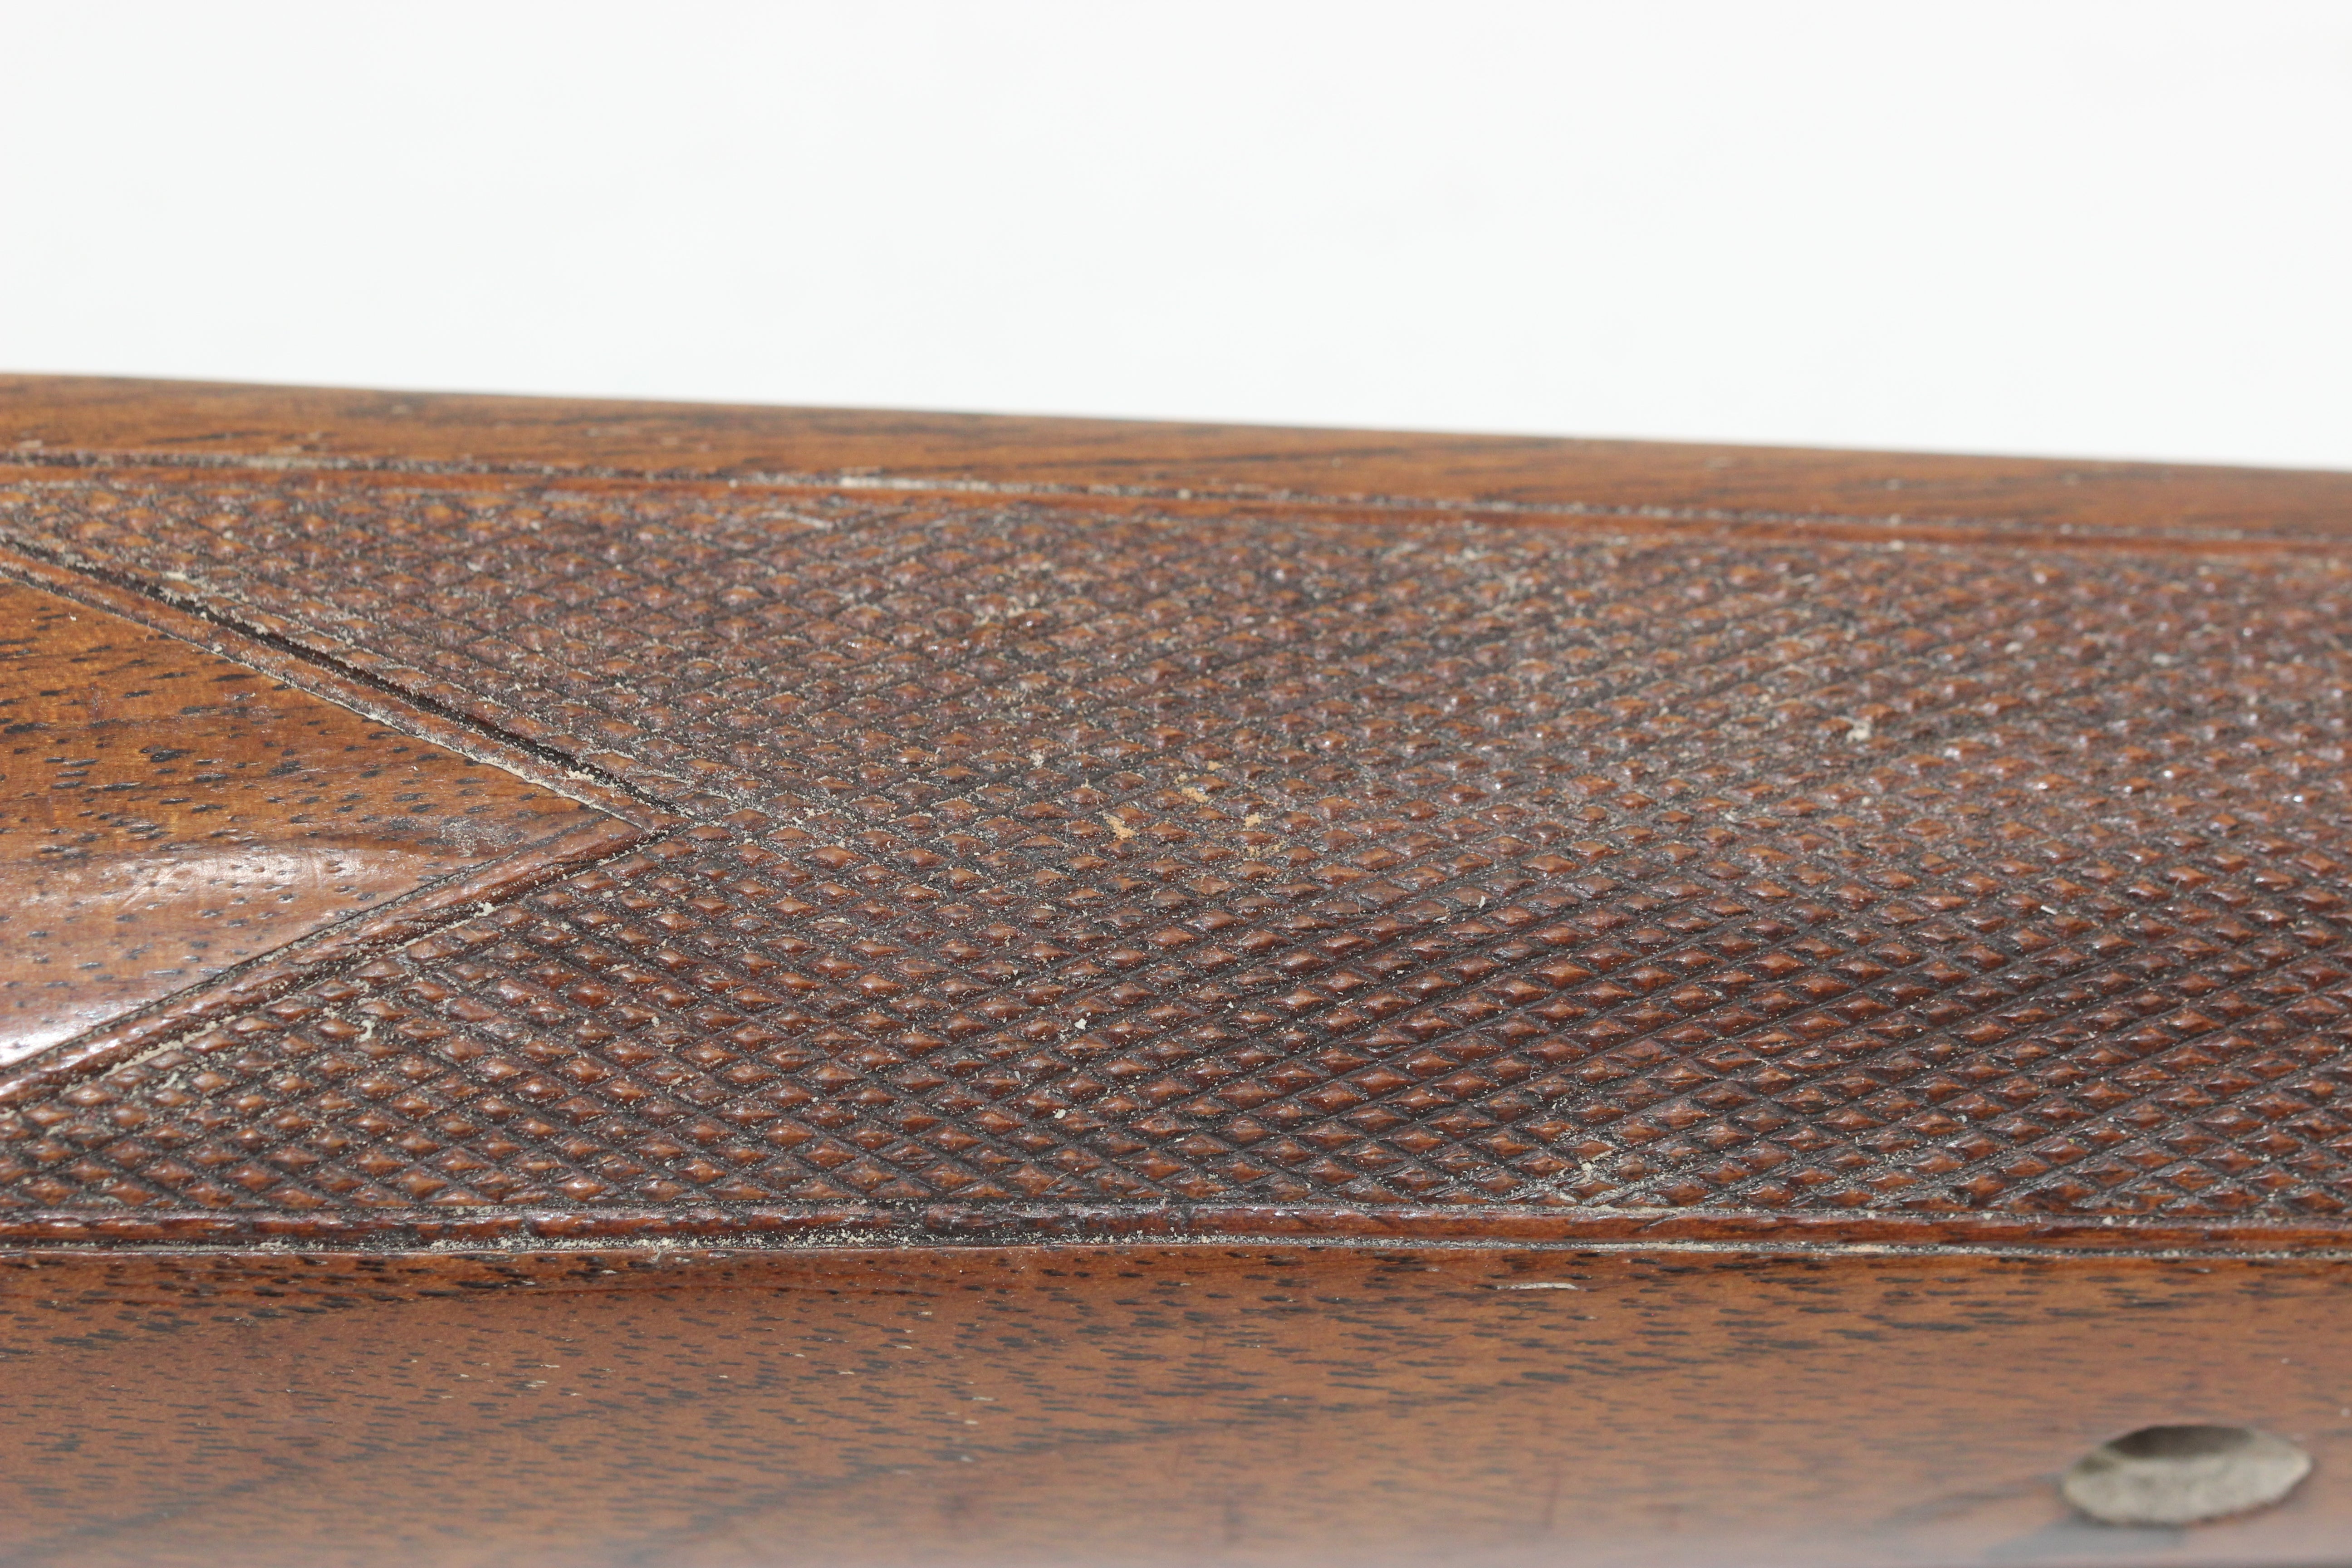 1948-1950 Low Comb Standard Rifle Stock